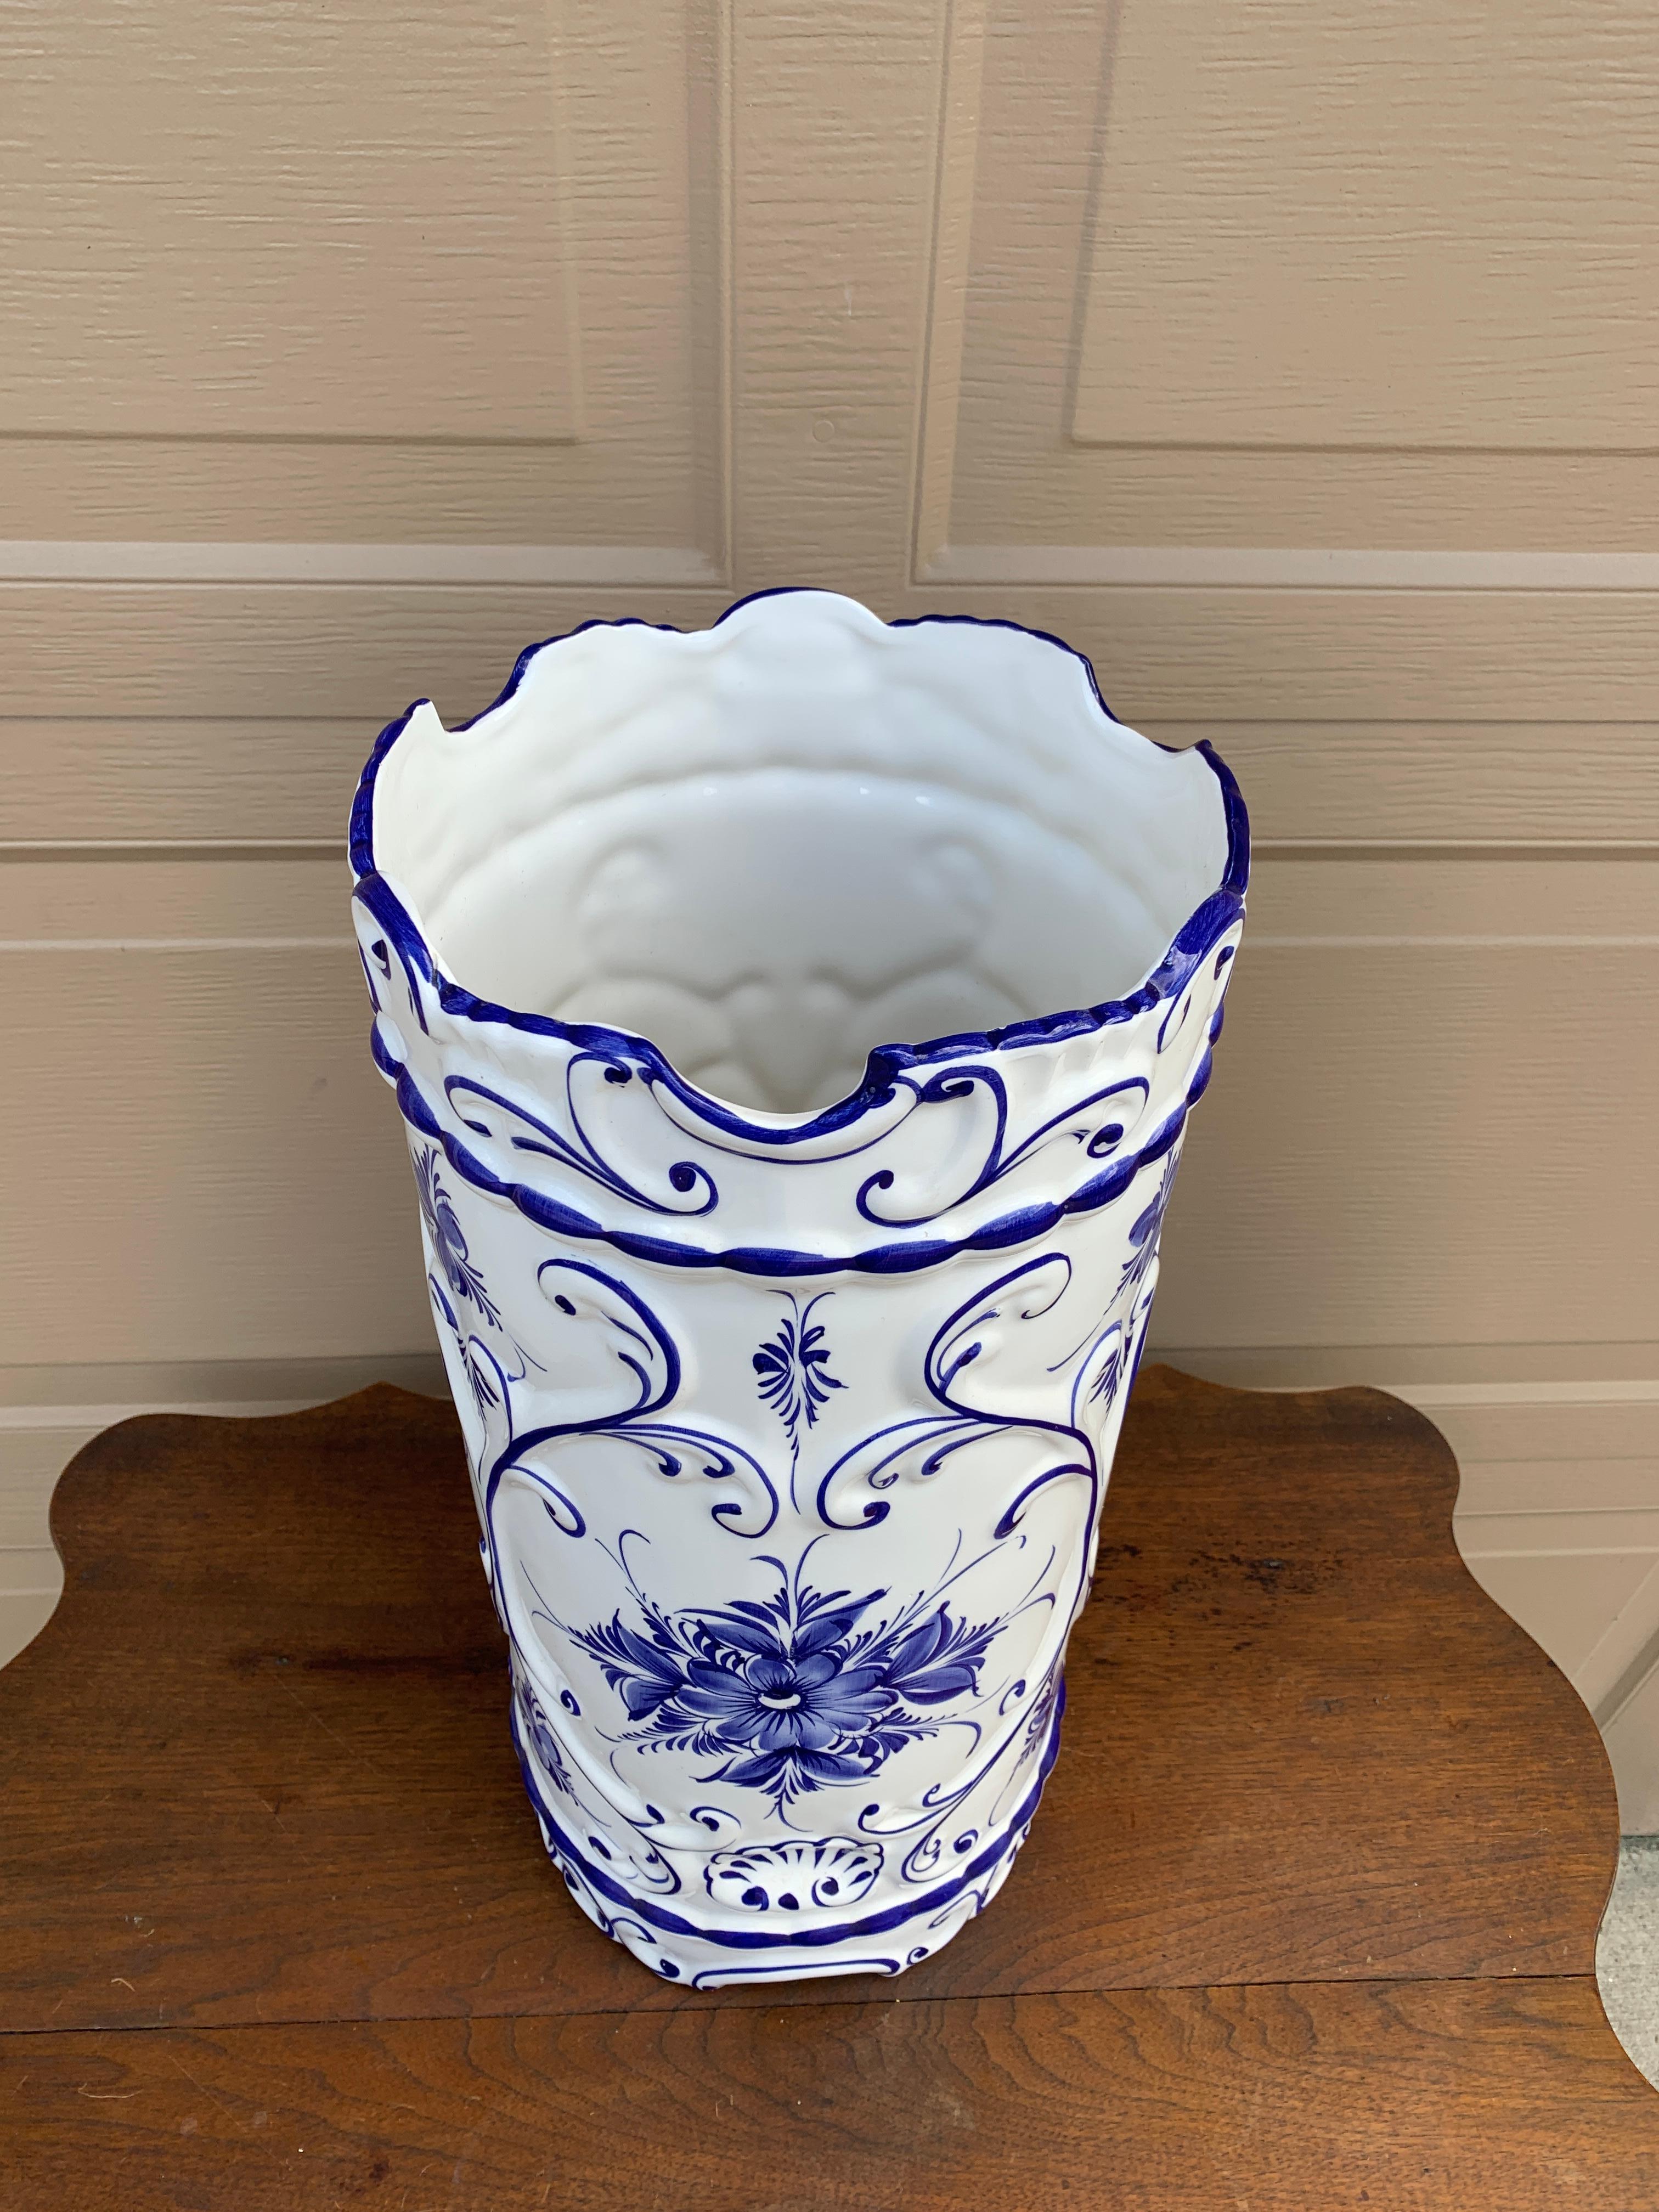 Chinoiserie Vintage Portuguese Blue and White Porcelain Umbrella Stand